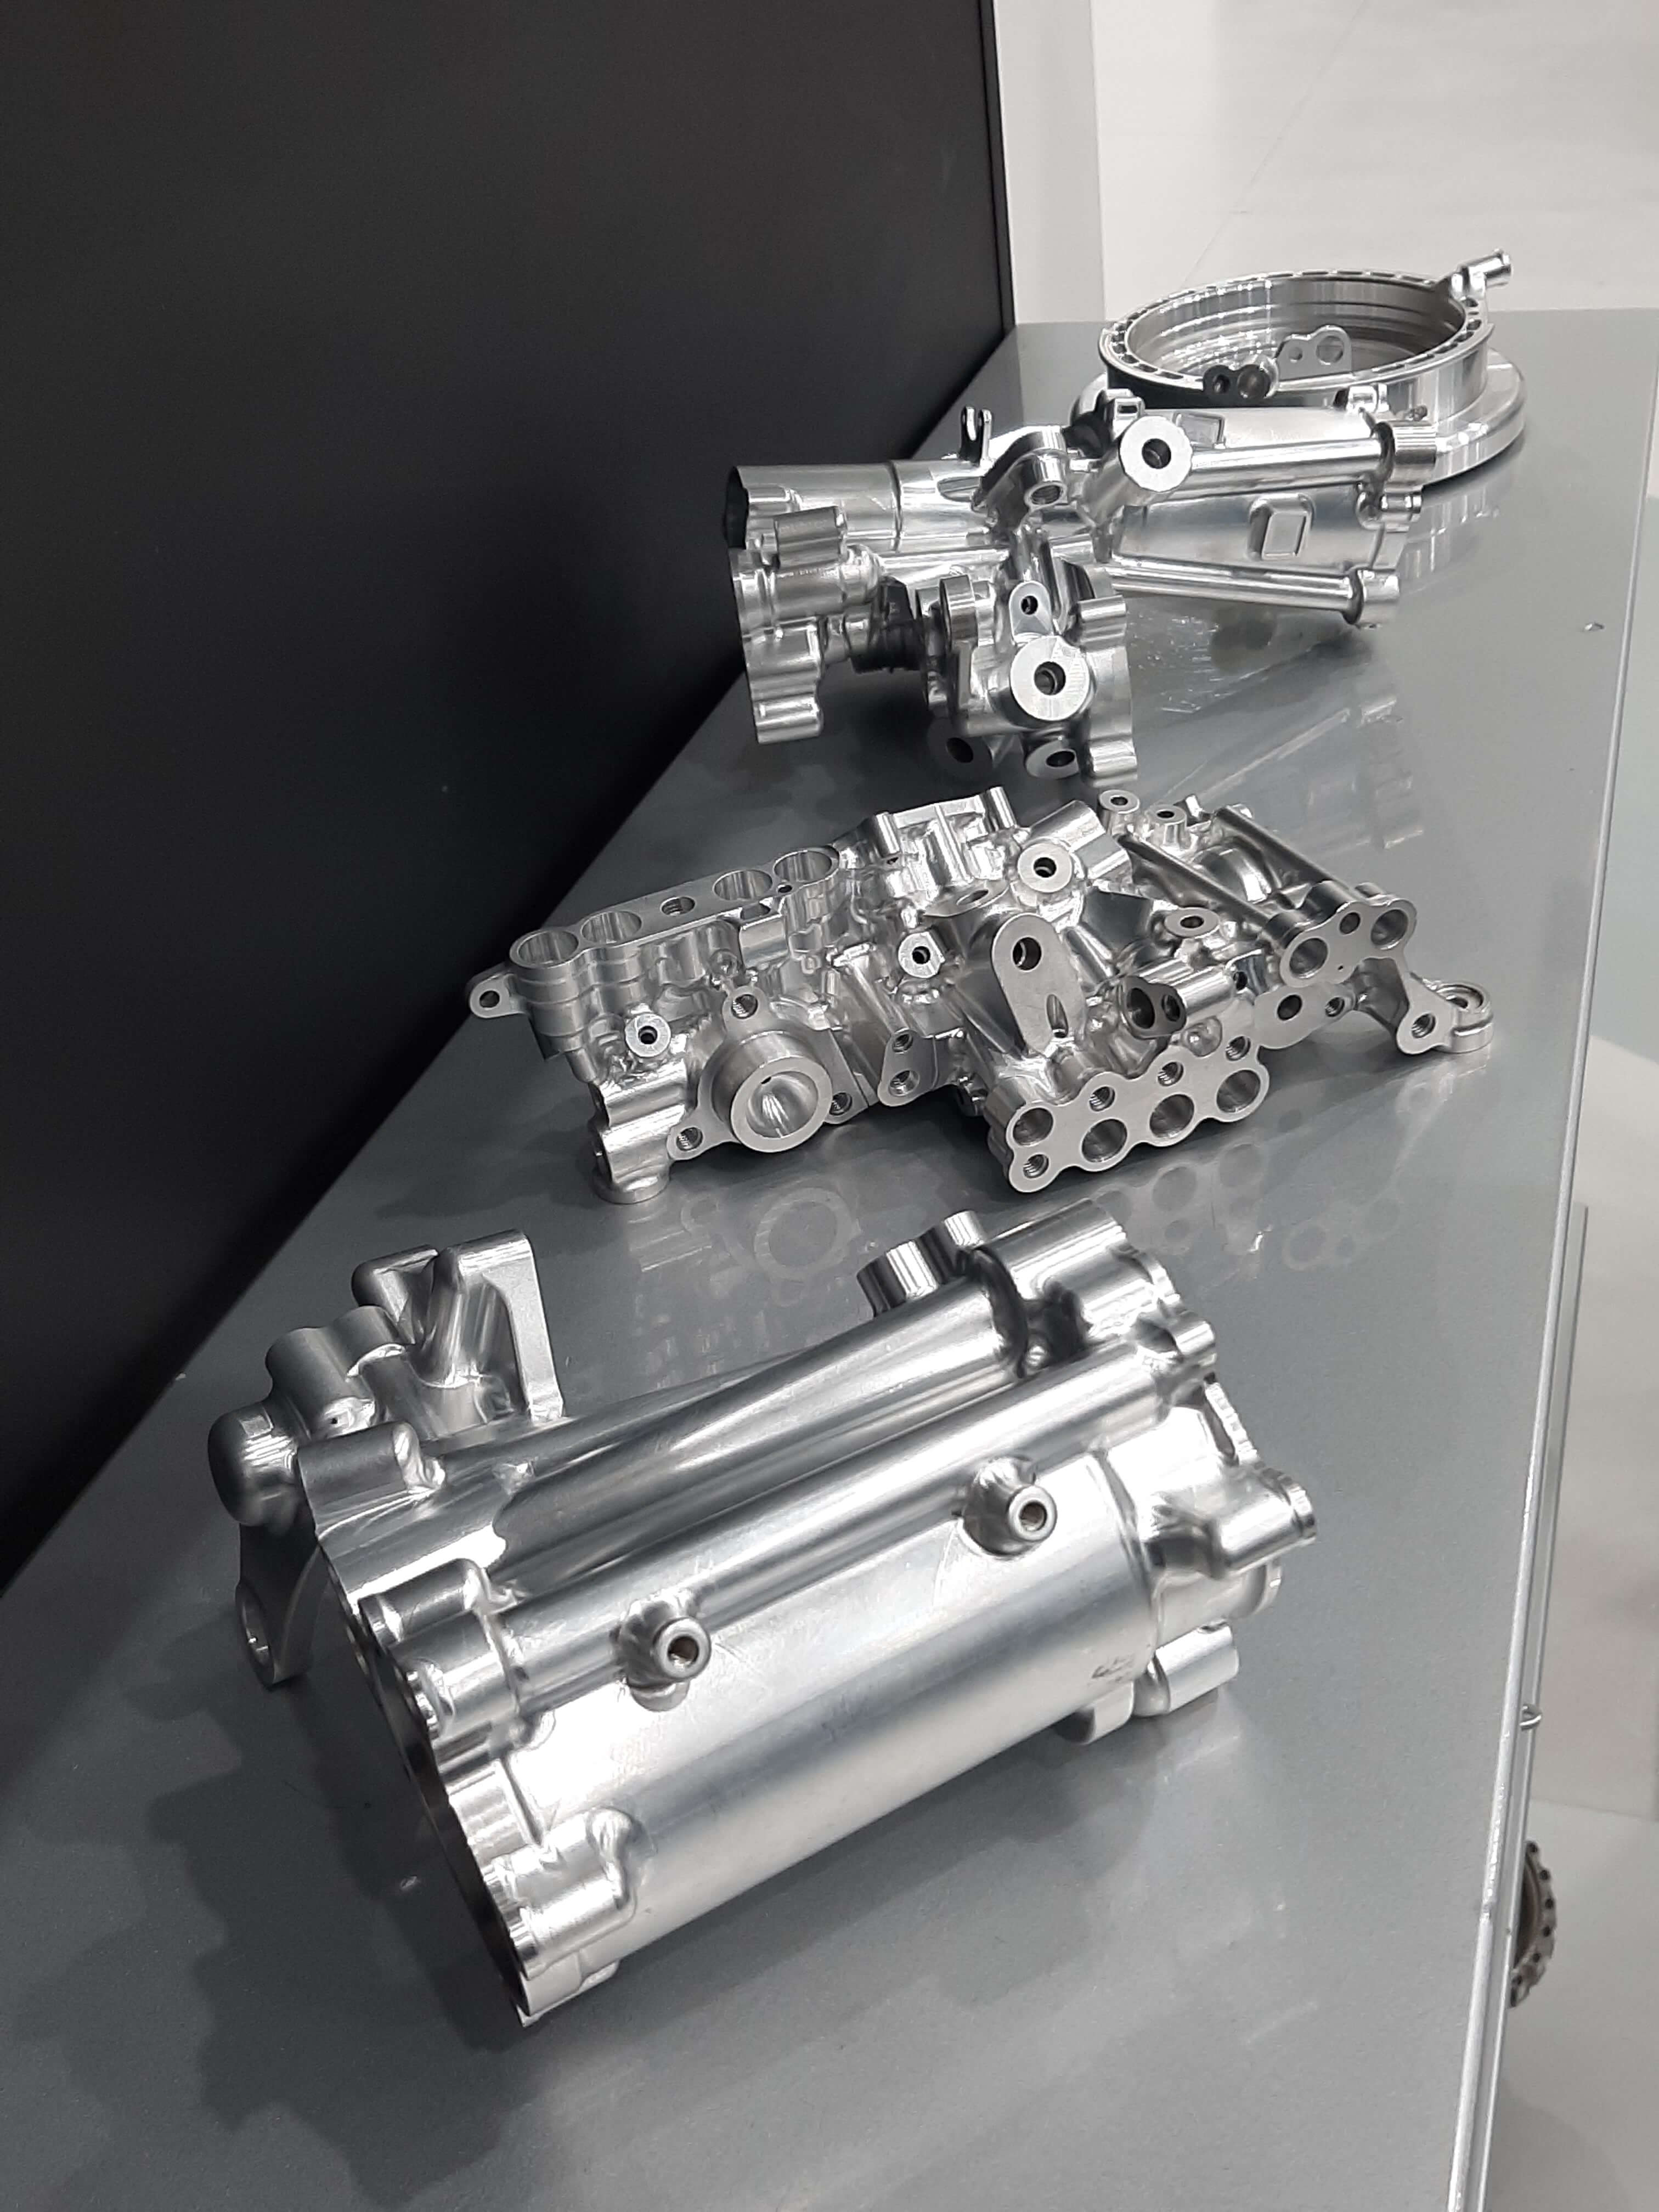 The machining of complex multi axis parts with freeform features is made easier with VERICUT